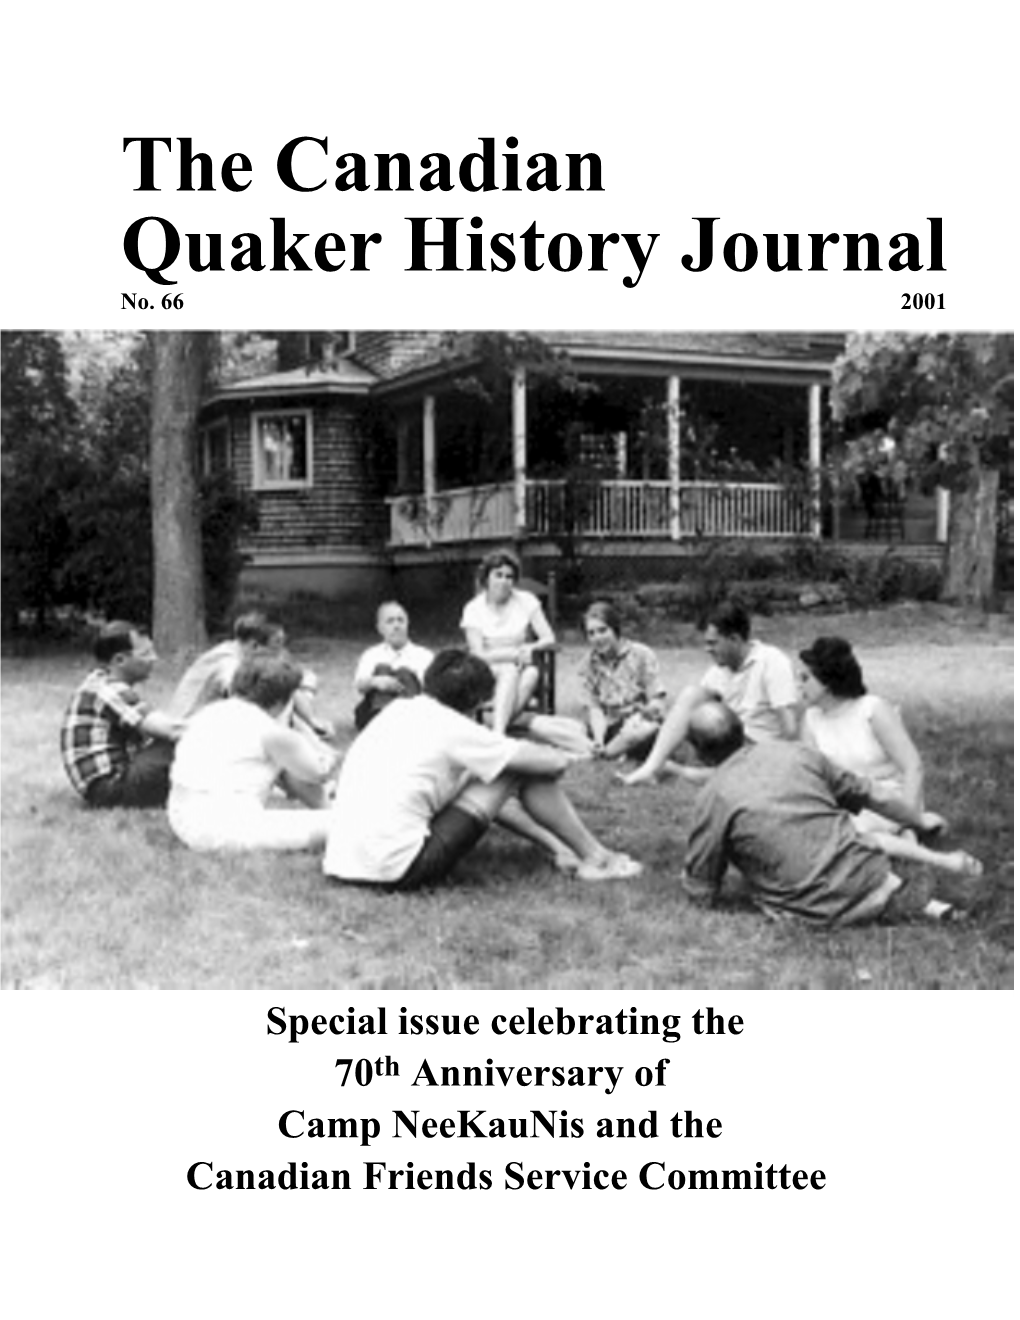 The Canadian Quaker History Journal No